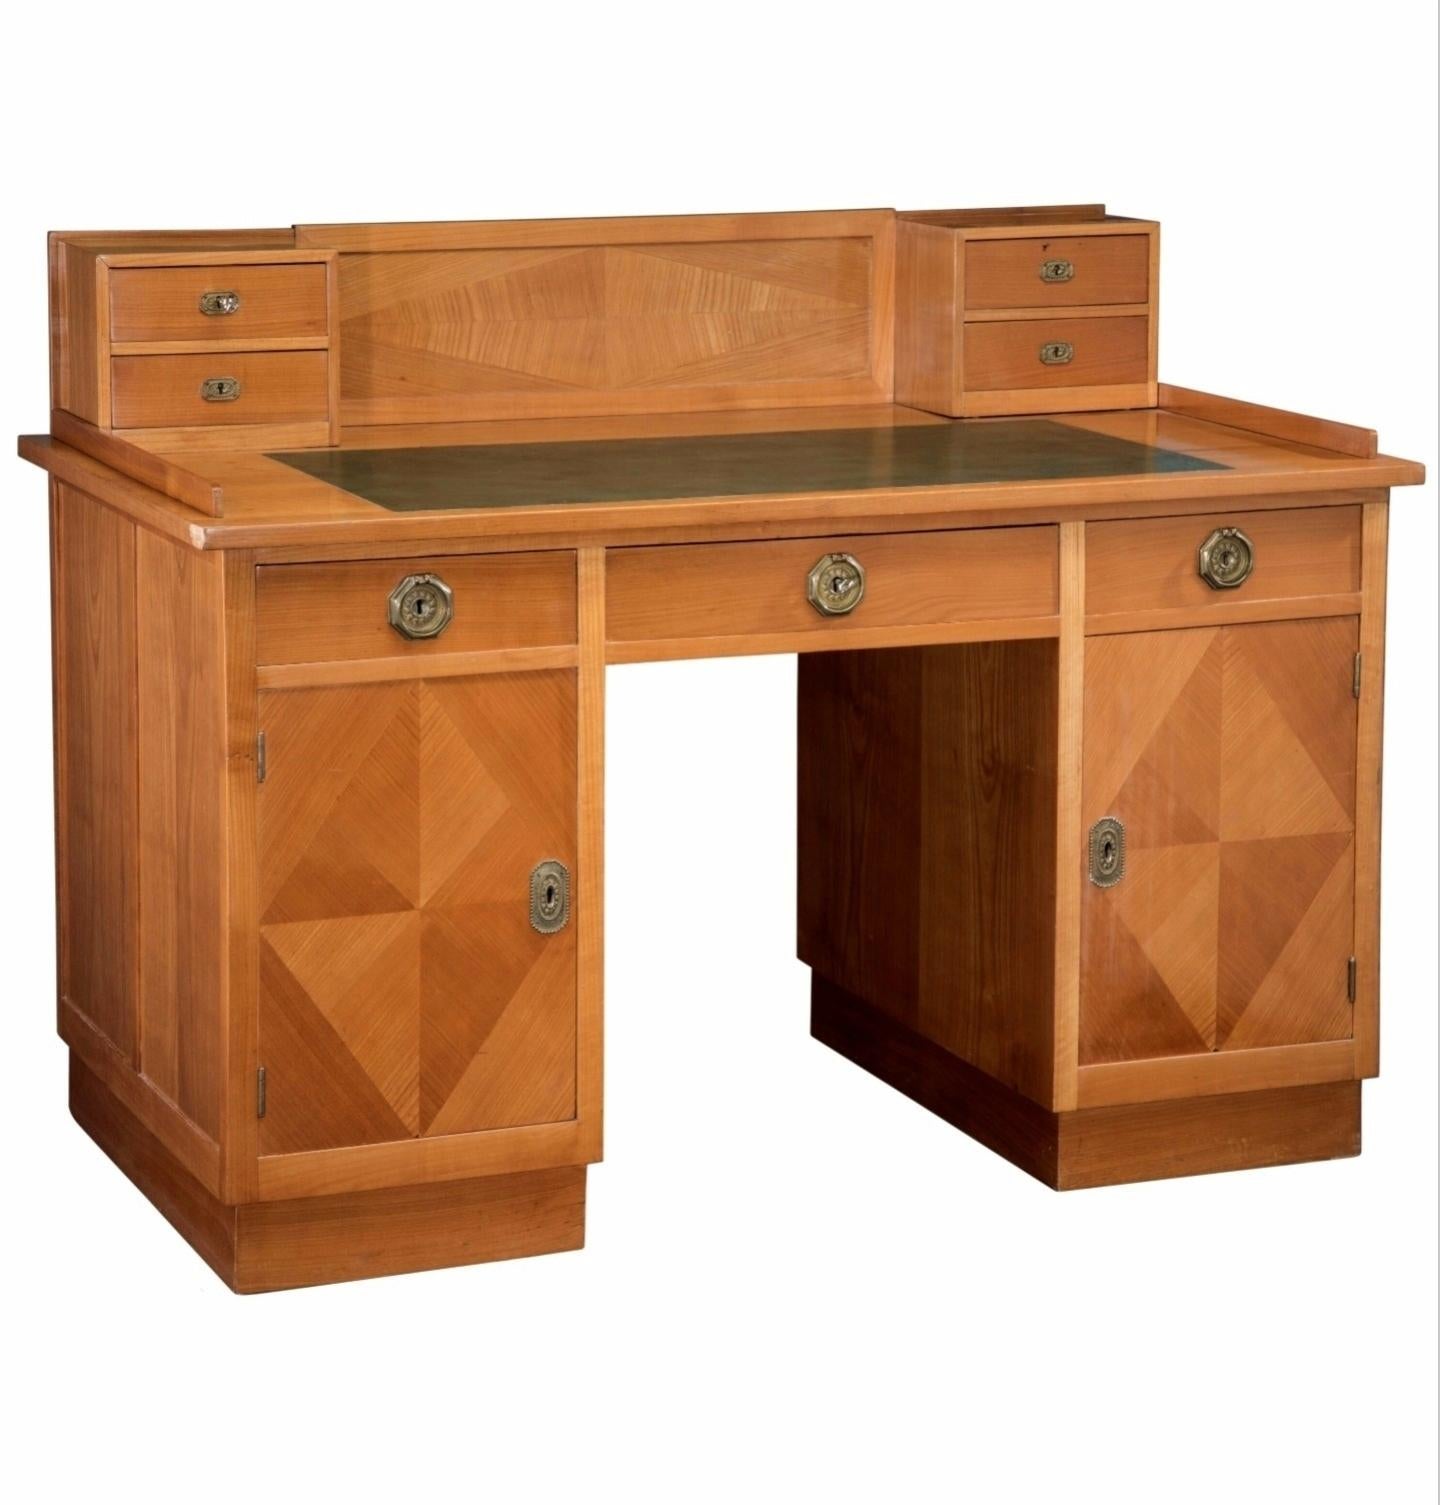 A rare Art Deco period eight-piece study suite set in the manner of famous Austrian architect, designer, and Vienna Secession founder Josef Hoffman (Austria, 1870-1956), circa 1920.

Exquisitely handcrafted in Austria in the early 20th century, most